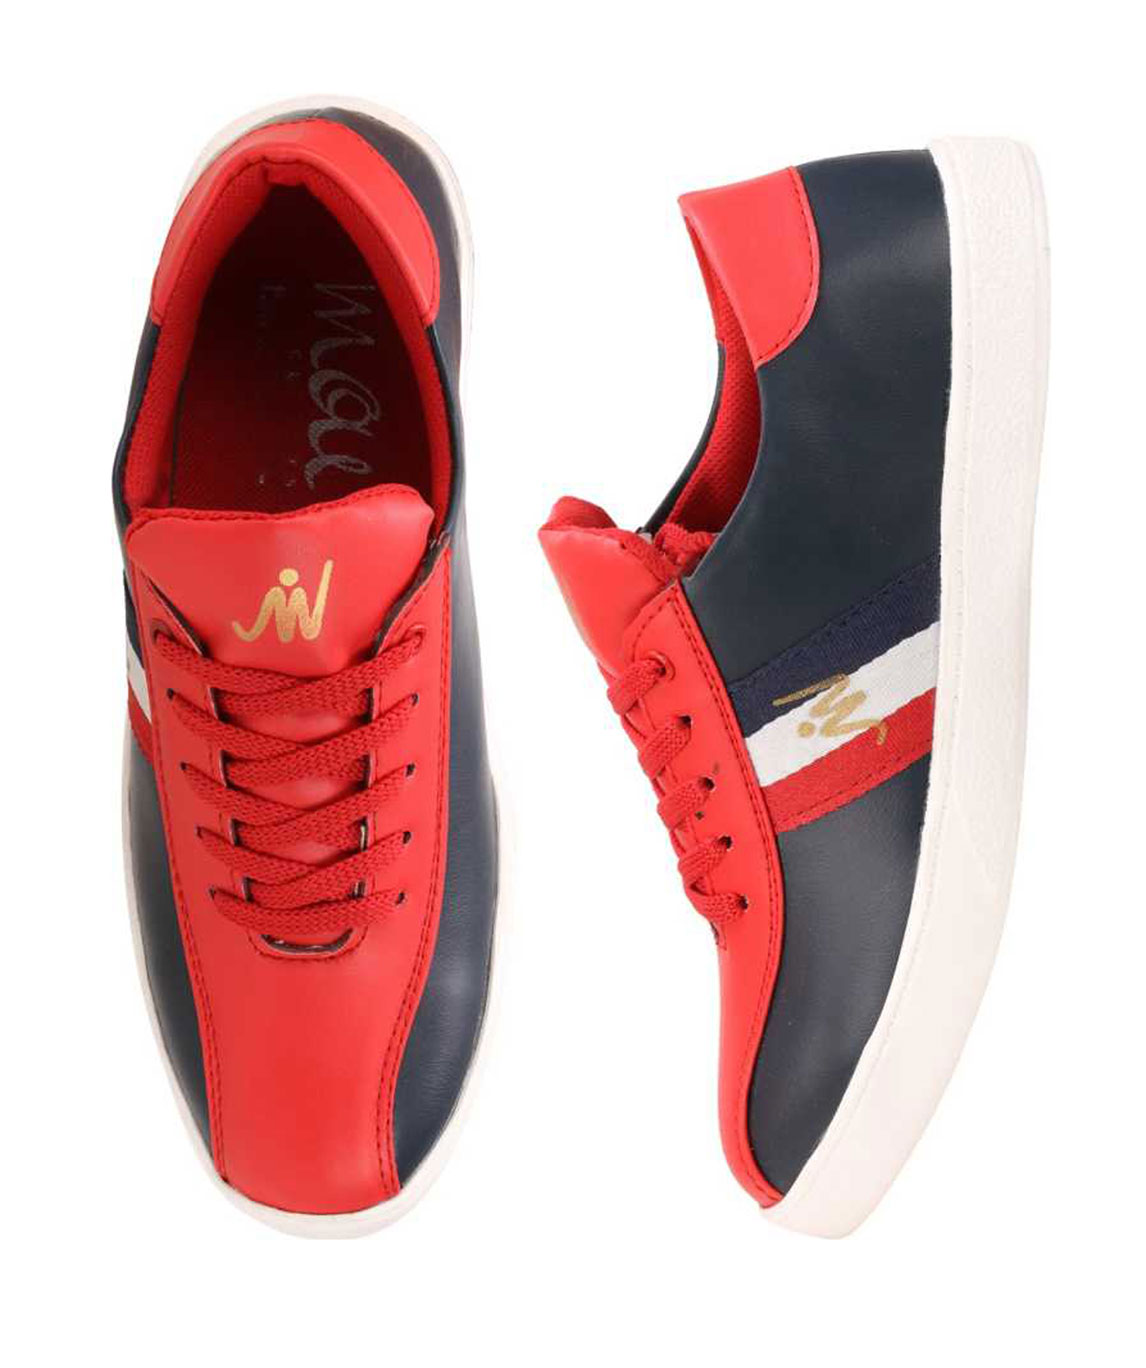 M-GCI SNEAKERS SNEAKERS FOR MEN (NAVY, RED, WHITE)